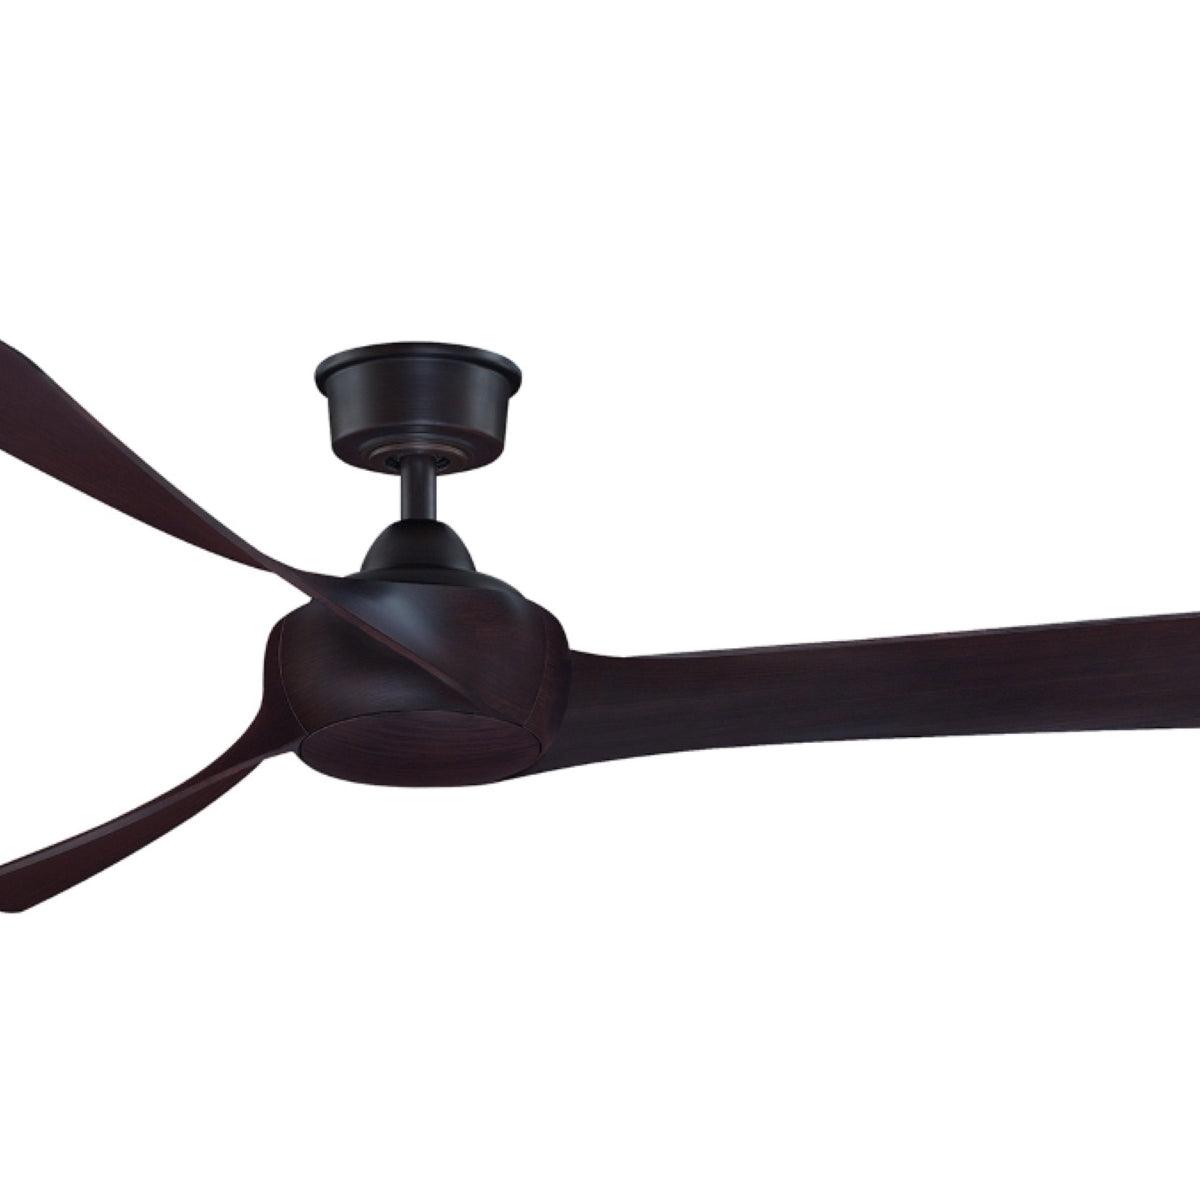 Wrap Custom Indoor/Outdoor Ceiling Fan Motor With Remote, Dark Bronze Finish, 44-60" Blades Sold Separately - Bees Lighting